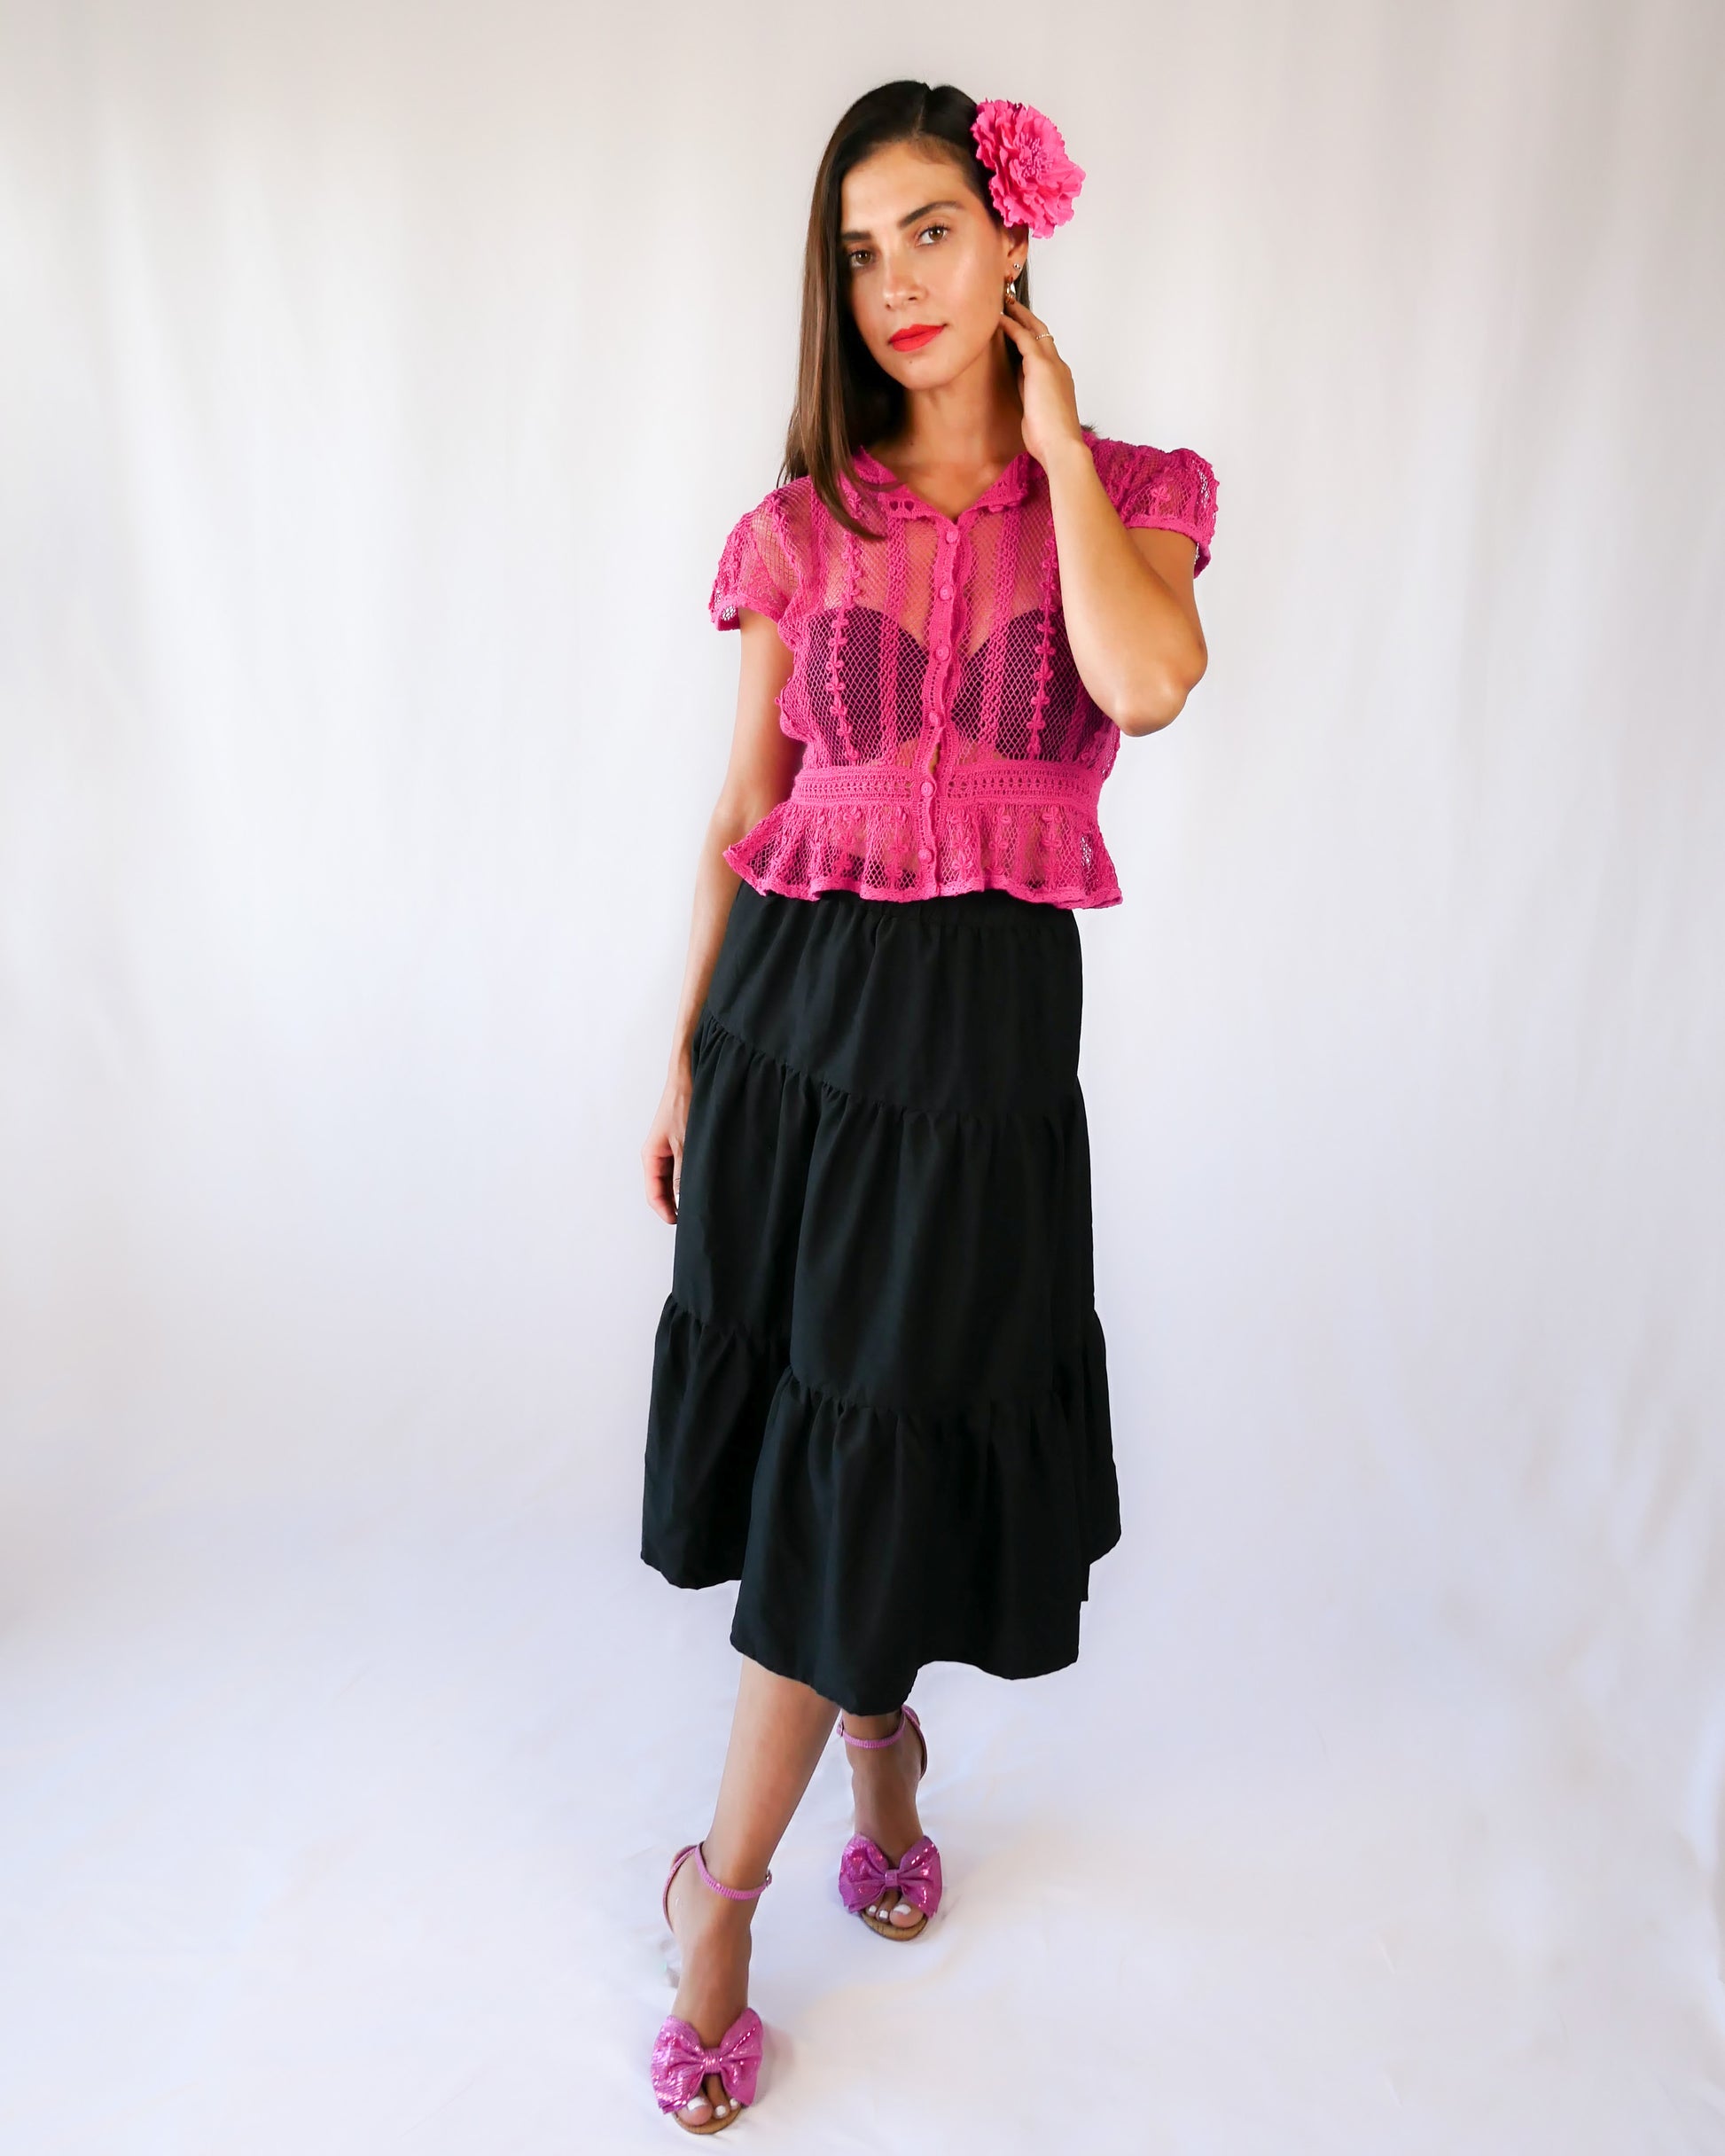 Delicate mesh pattern hand crocheted short puff sleeve top in a pretty fuschia pink!  This top has a high waist and flared hem. This is a Lim’s original vintage piece from the 1980s with trim added recently to finish the hem.  The top is reversible and can be buttoned up the front or back.  